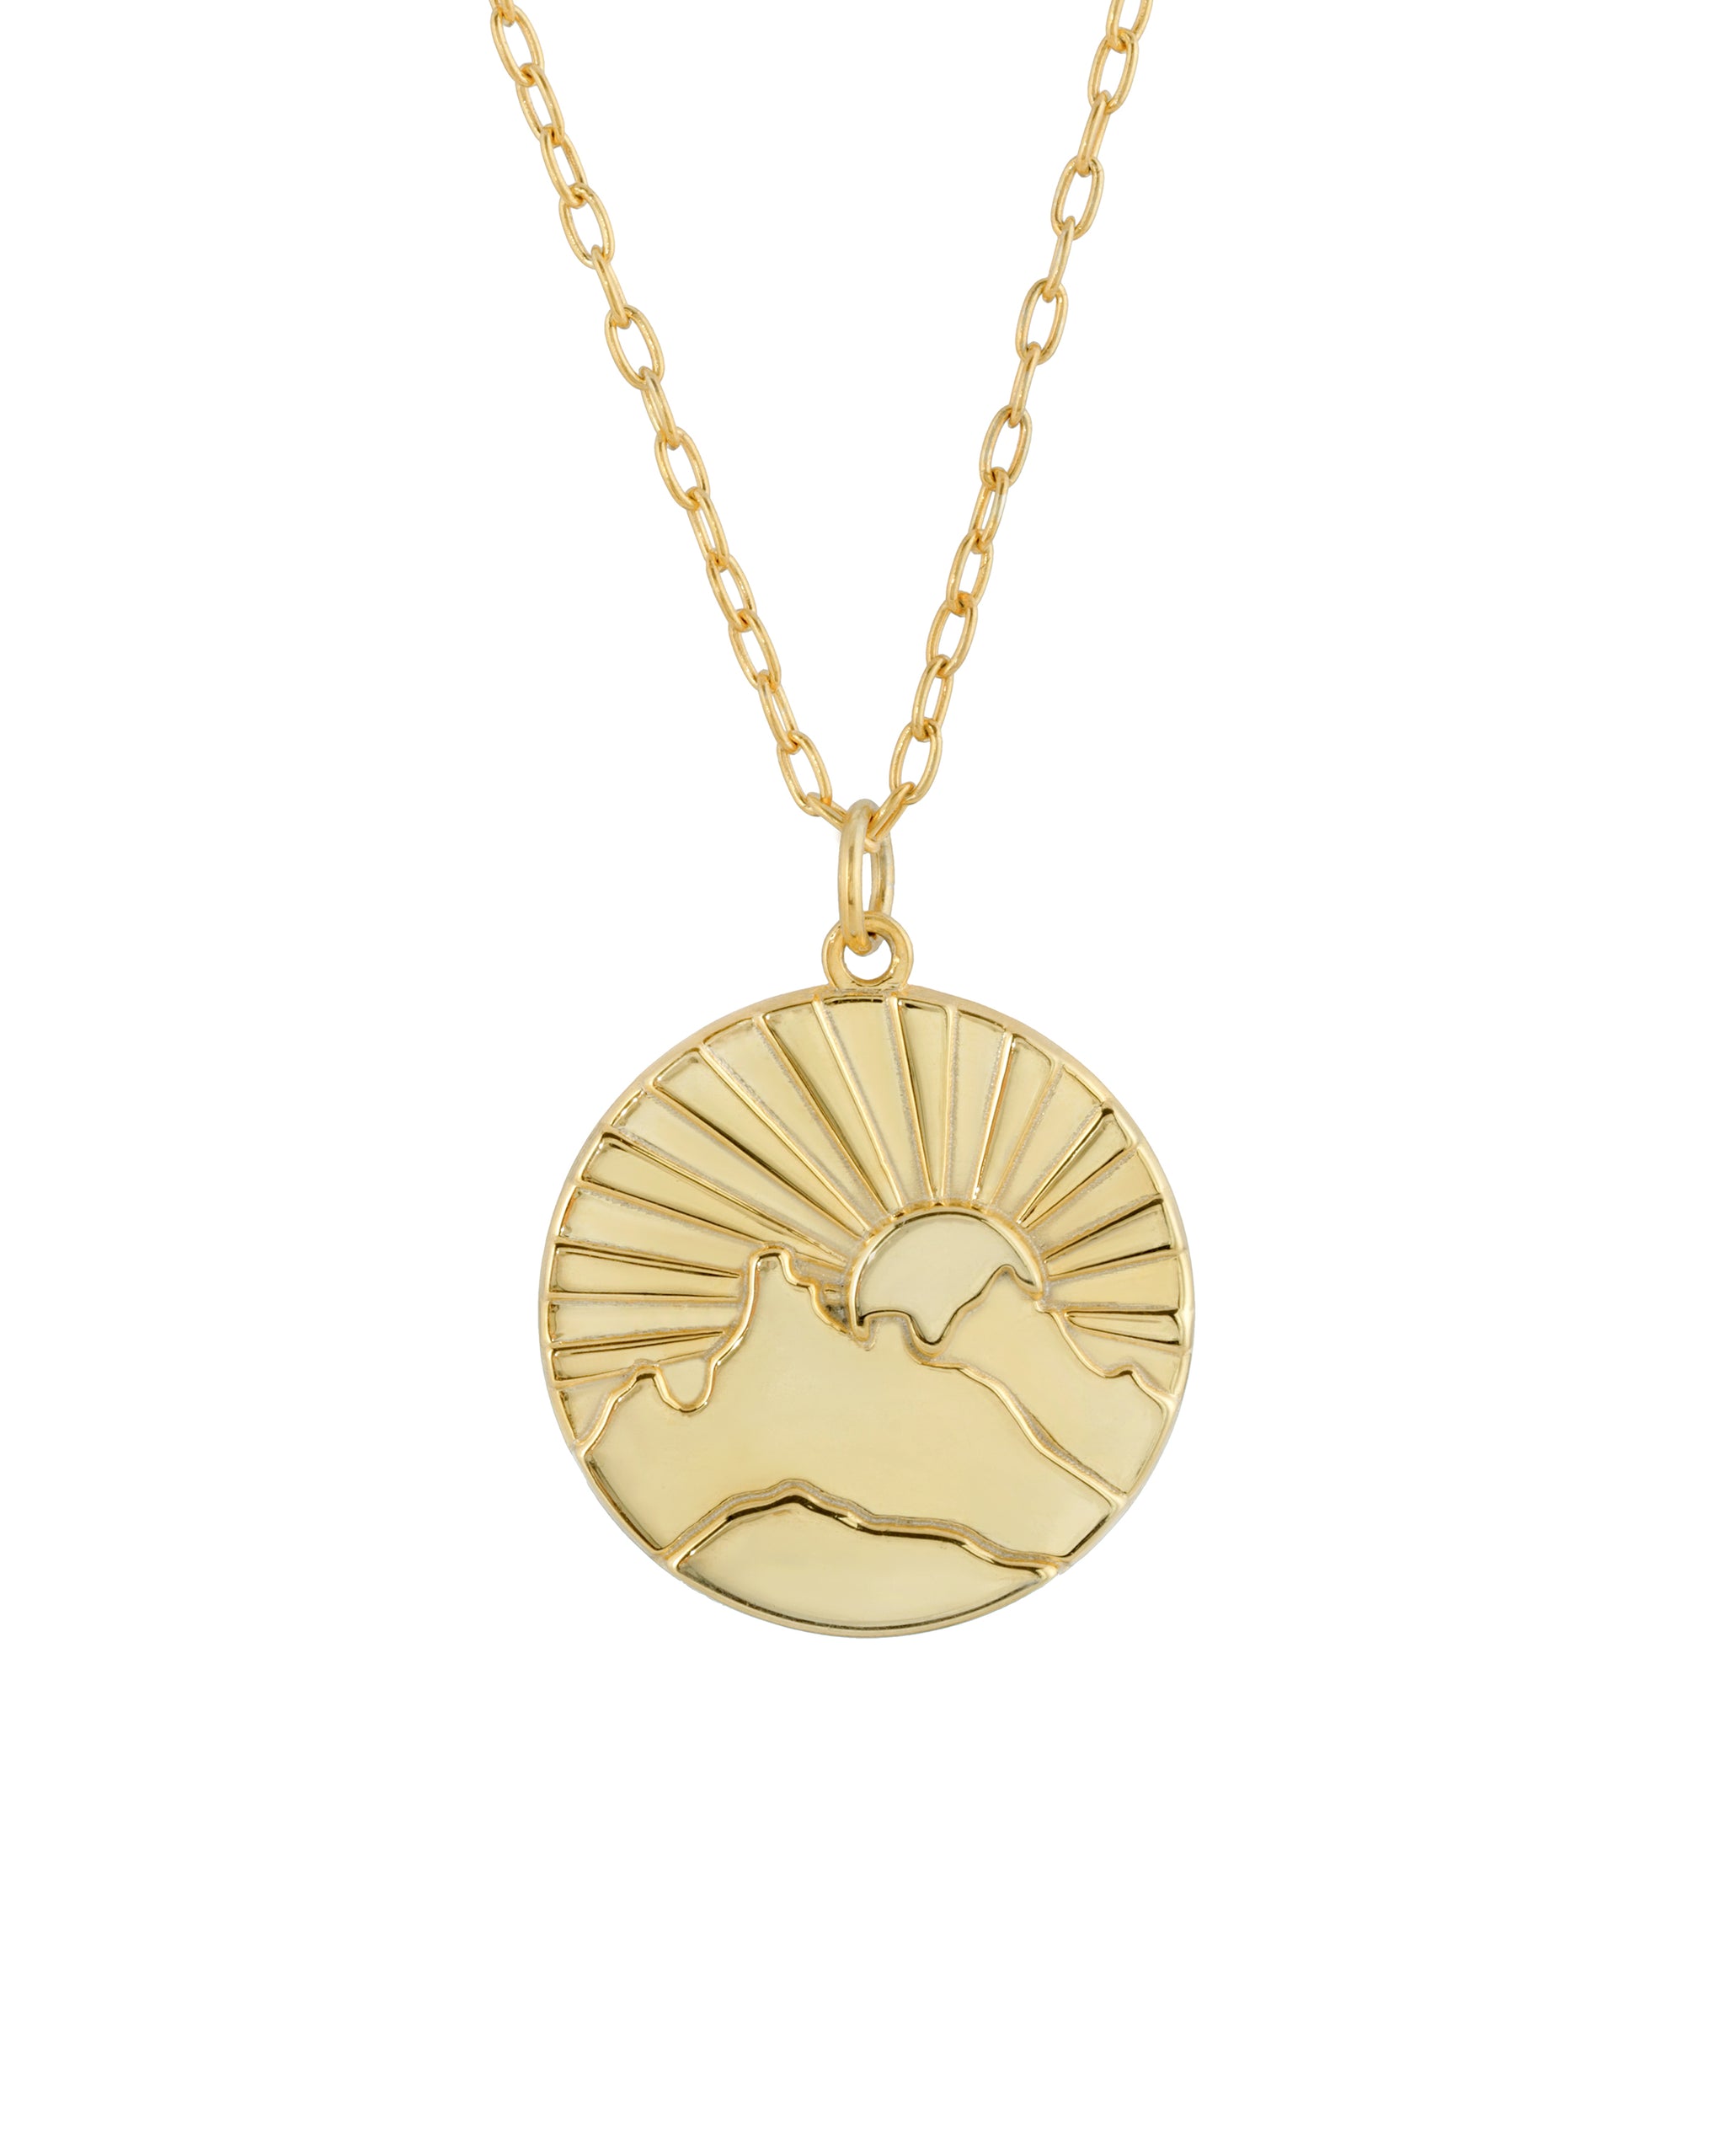 Rising Sun "Like the Sun you too shall rise" sunrise medallion necklace in solid 14k yellow gold handmade by turquoise and tobacco in los angeles california